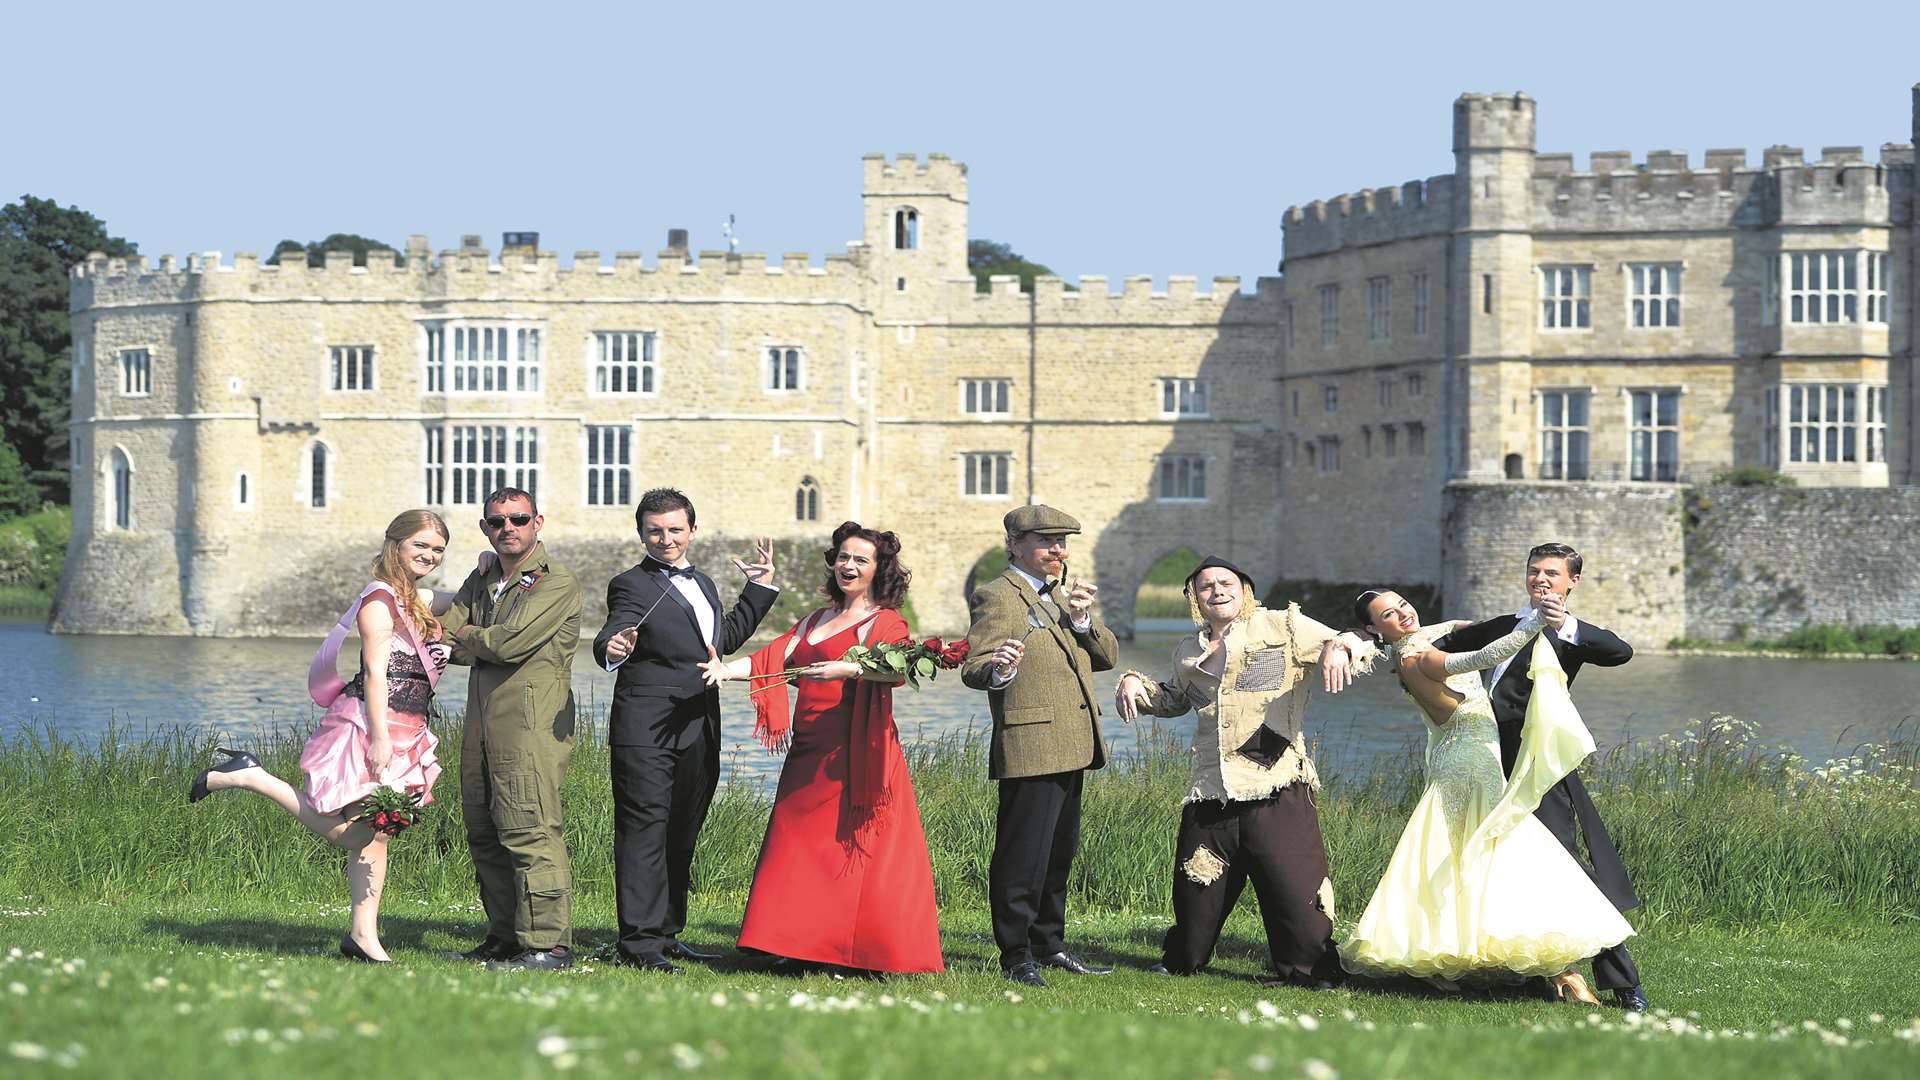 Summertime at Leeds Castle features shows and family activities throughout the summer